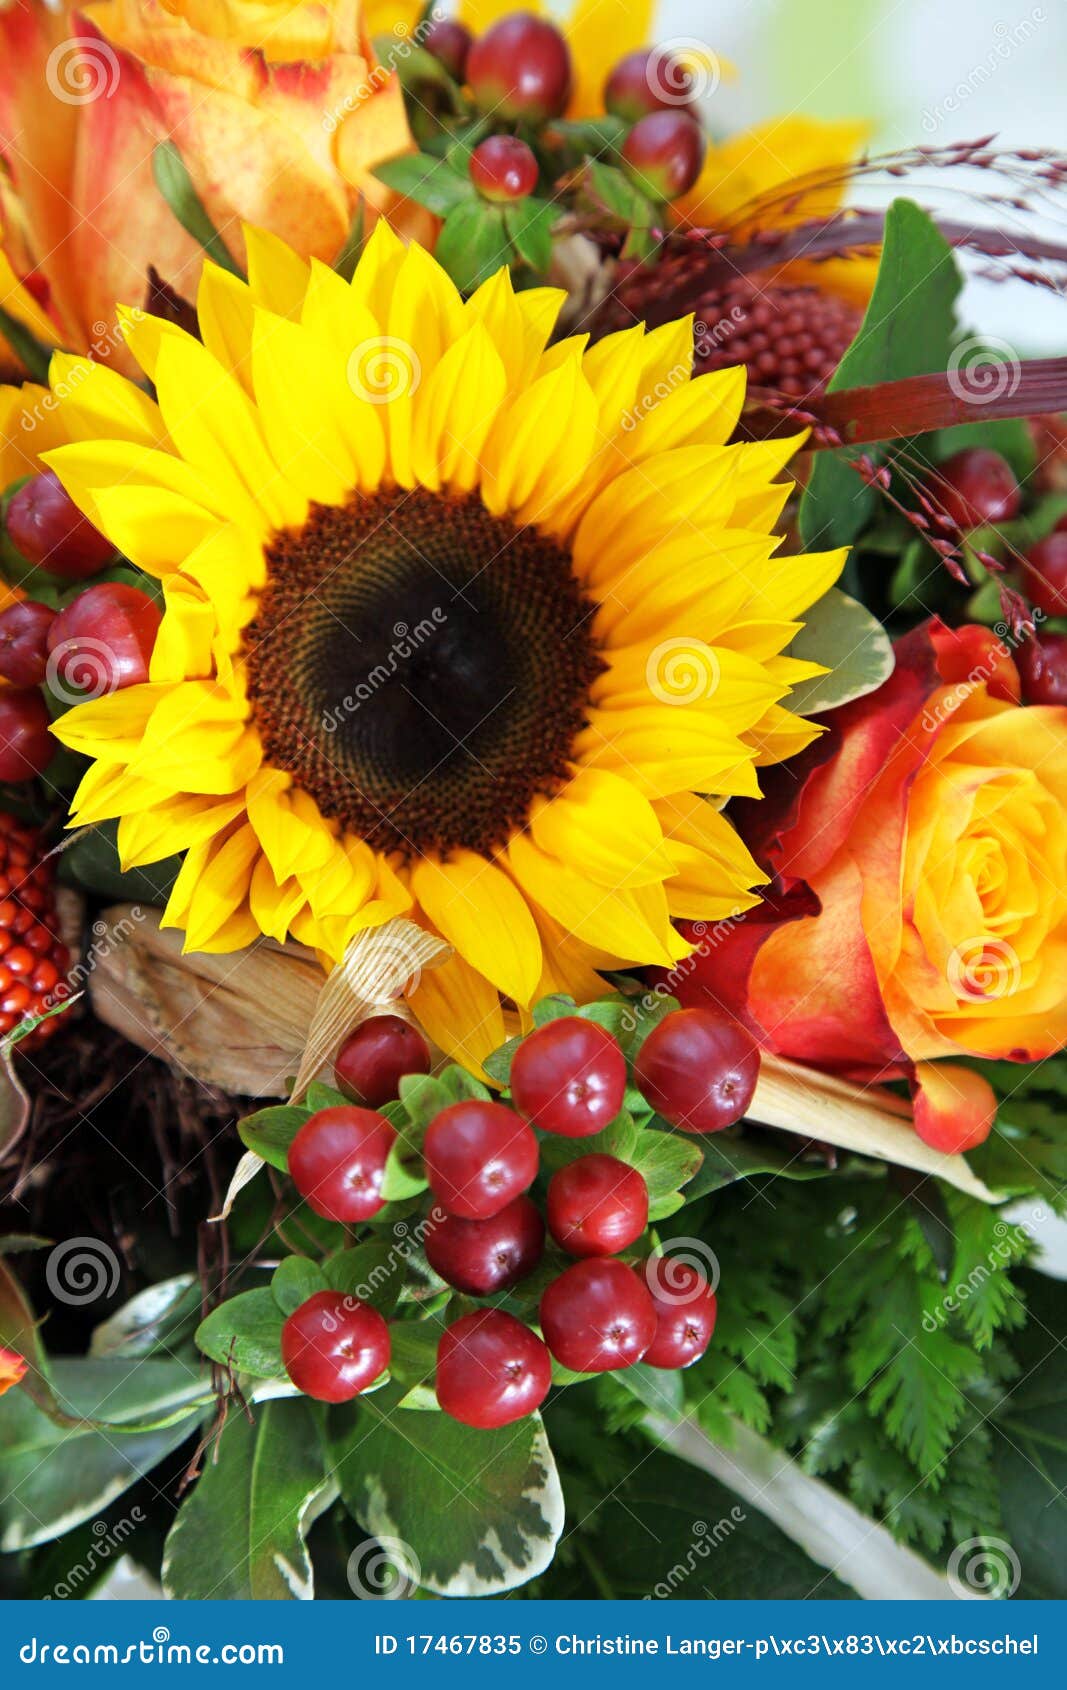 Roses Sunflowers Images Browse 43010 Stock Photos  Vectors Free Download  with Trial  Shutterstock